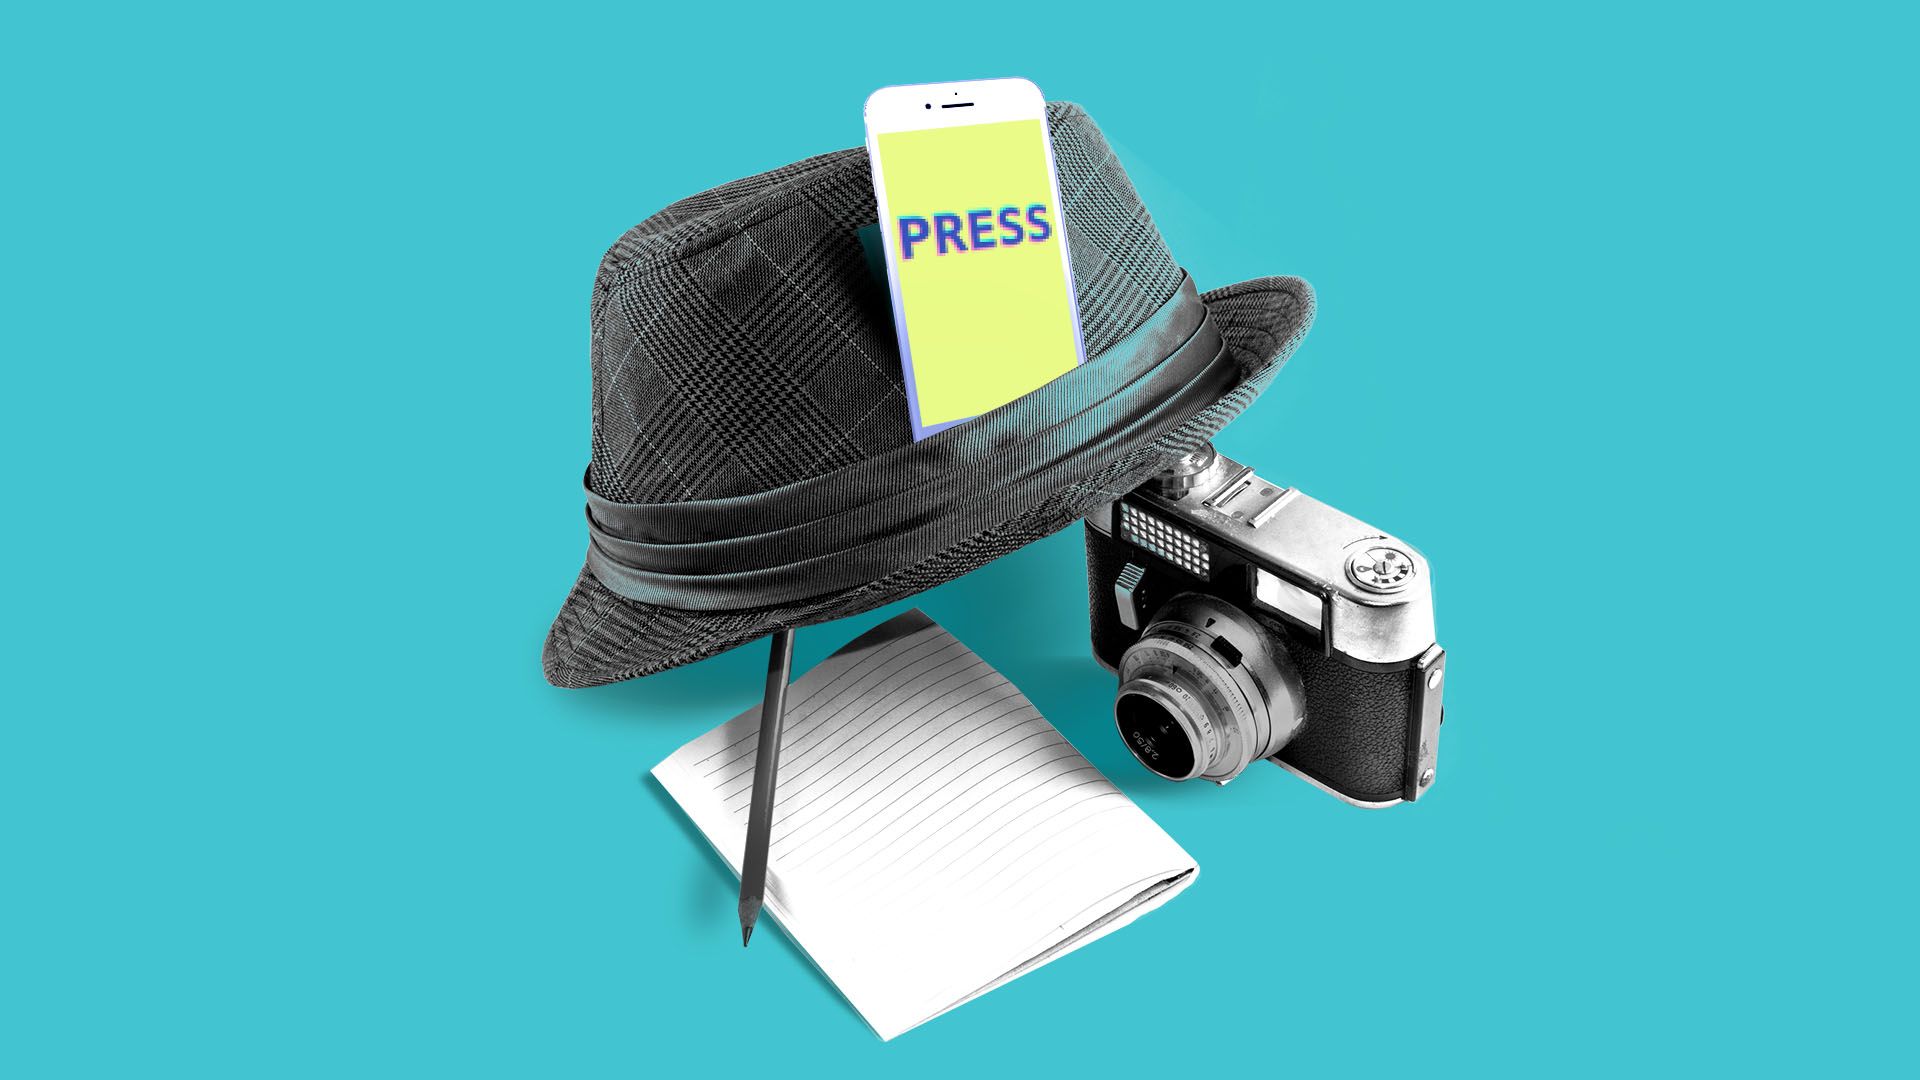 Illustration of vintage press hat with an iphone tucked in the brim